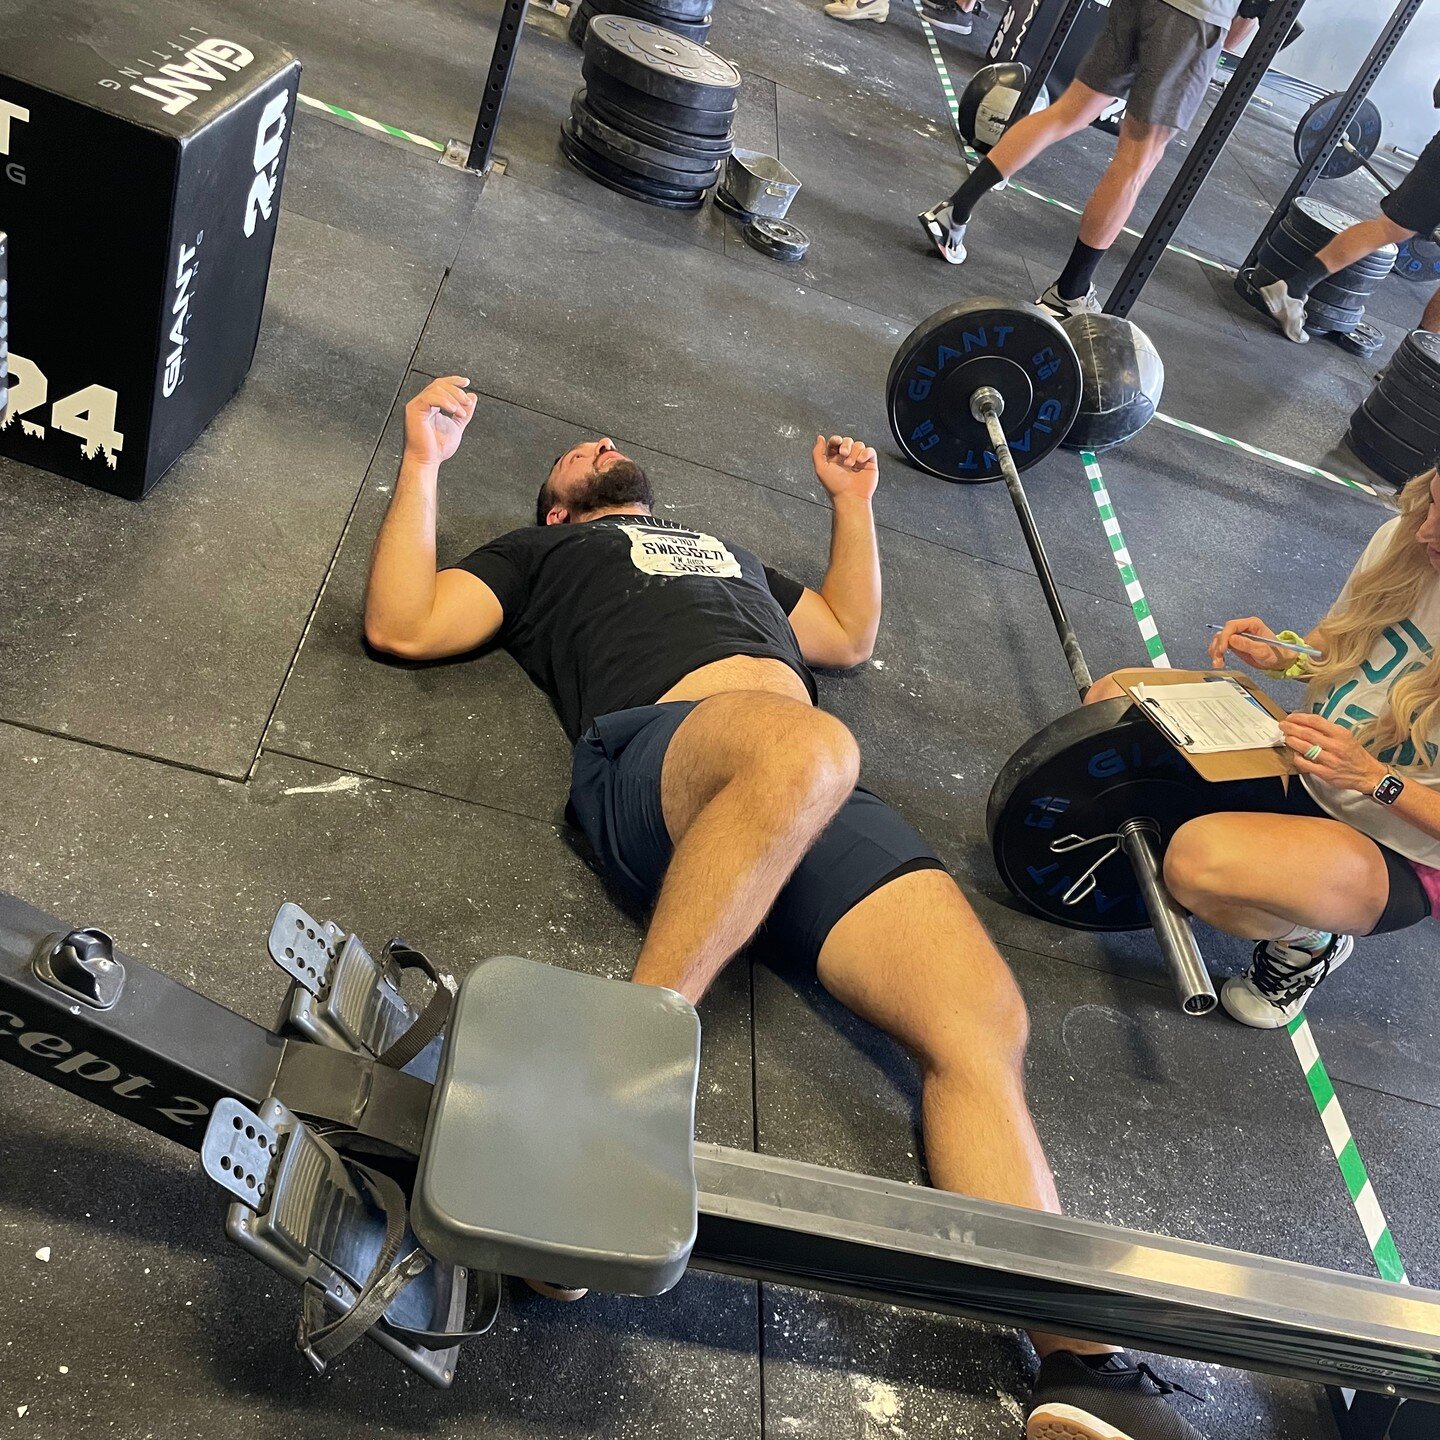 Actually, if you look closely, you can see @coltontrcic's soul leaving his body... 1K sprint on a rower is a great way to rep the It's Not Swagger I'm Just Sore tee!